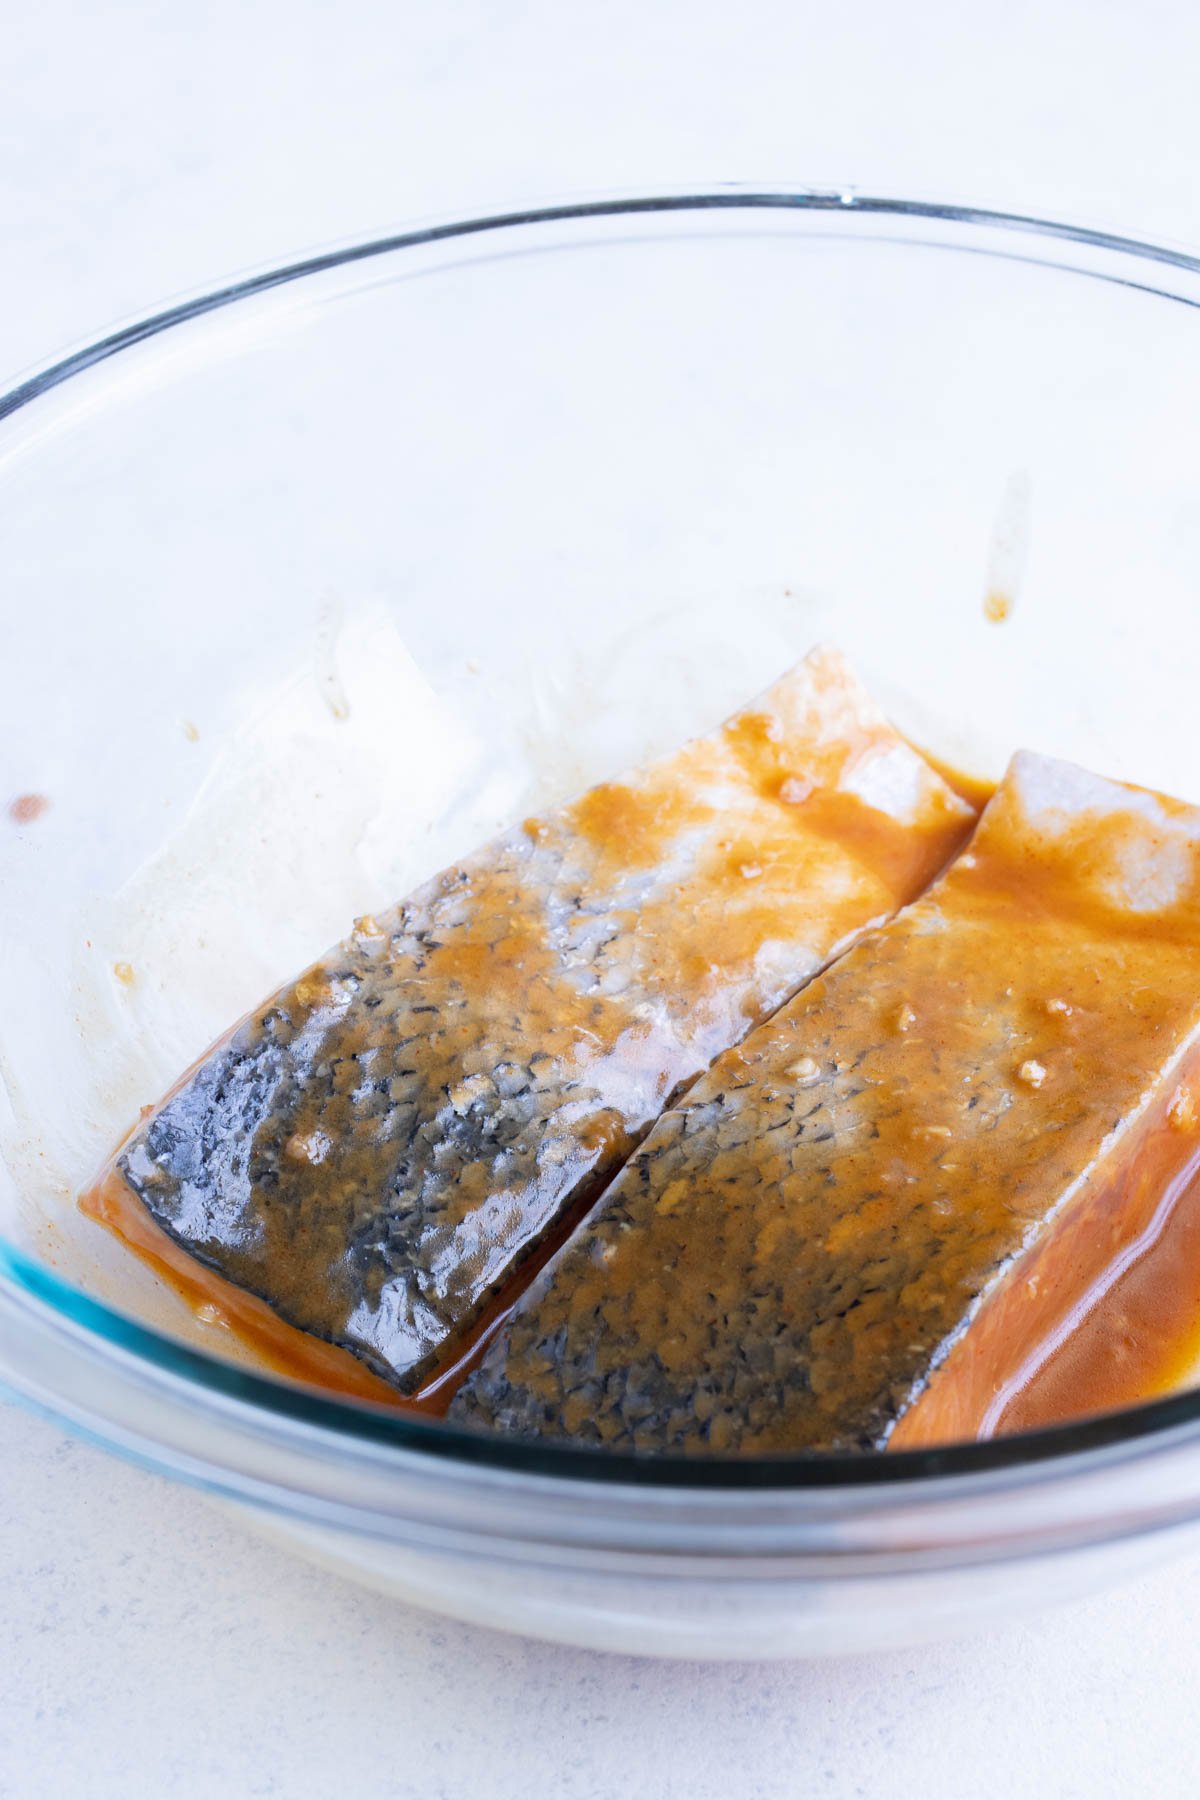 Salmon is put in the marinade before cooking.